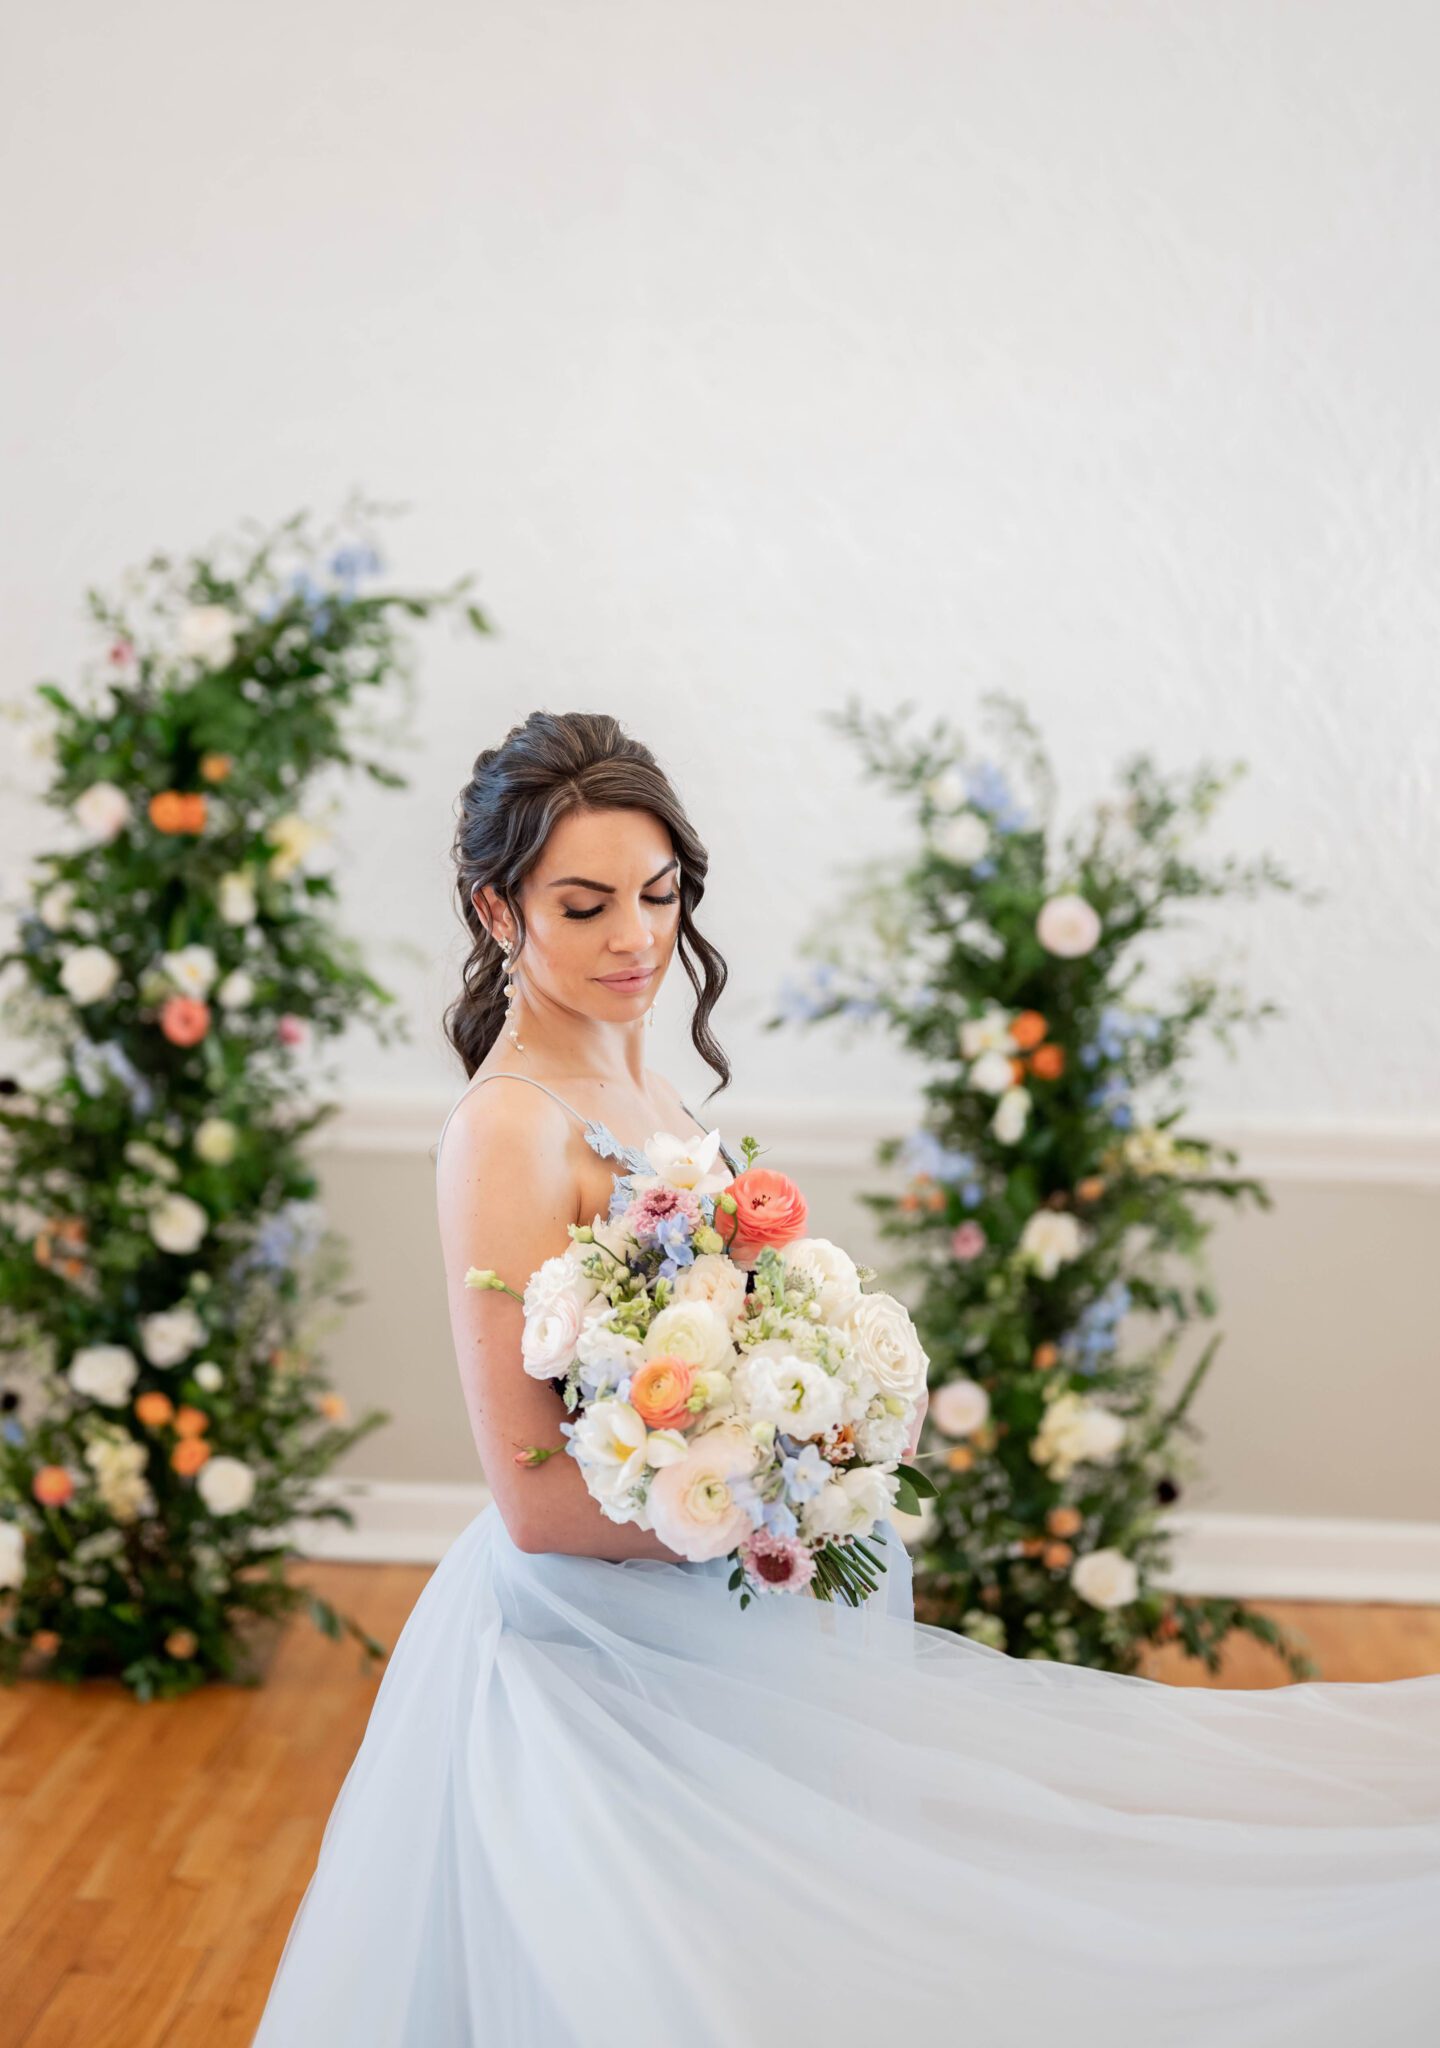 Feminine bridal portrait before ceremony holding pastel coloured bouquet, column floral arch with lush greenery as a focal point of the an indoor ceremony, baby blue wedding dress inspiration  